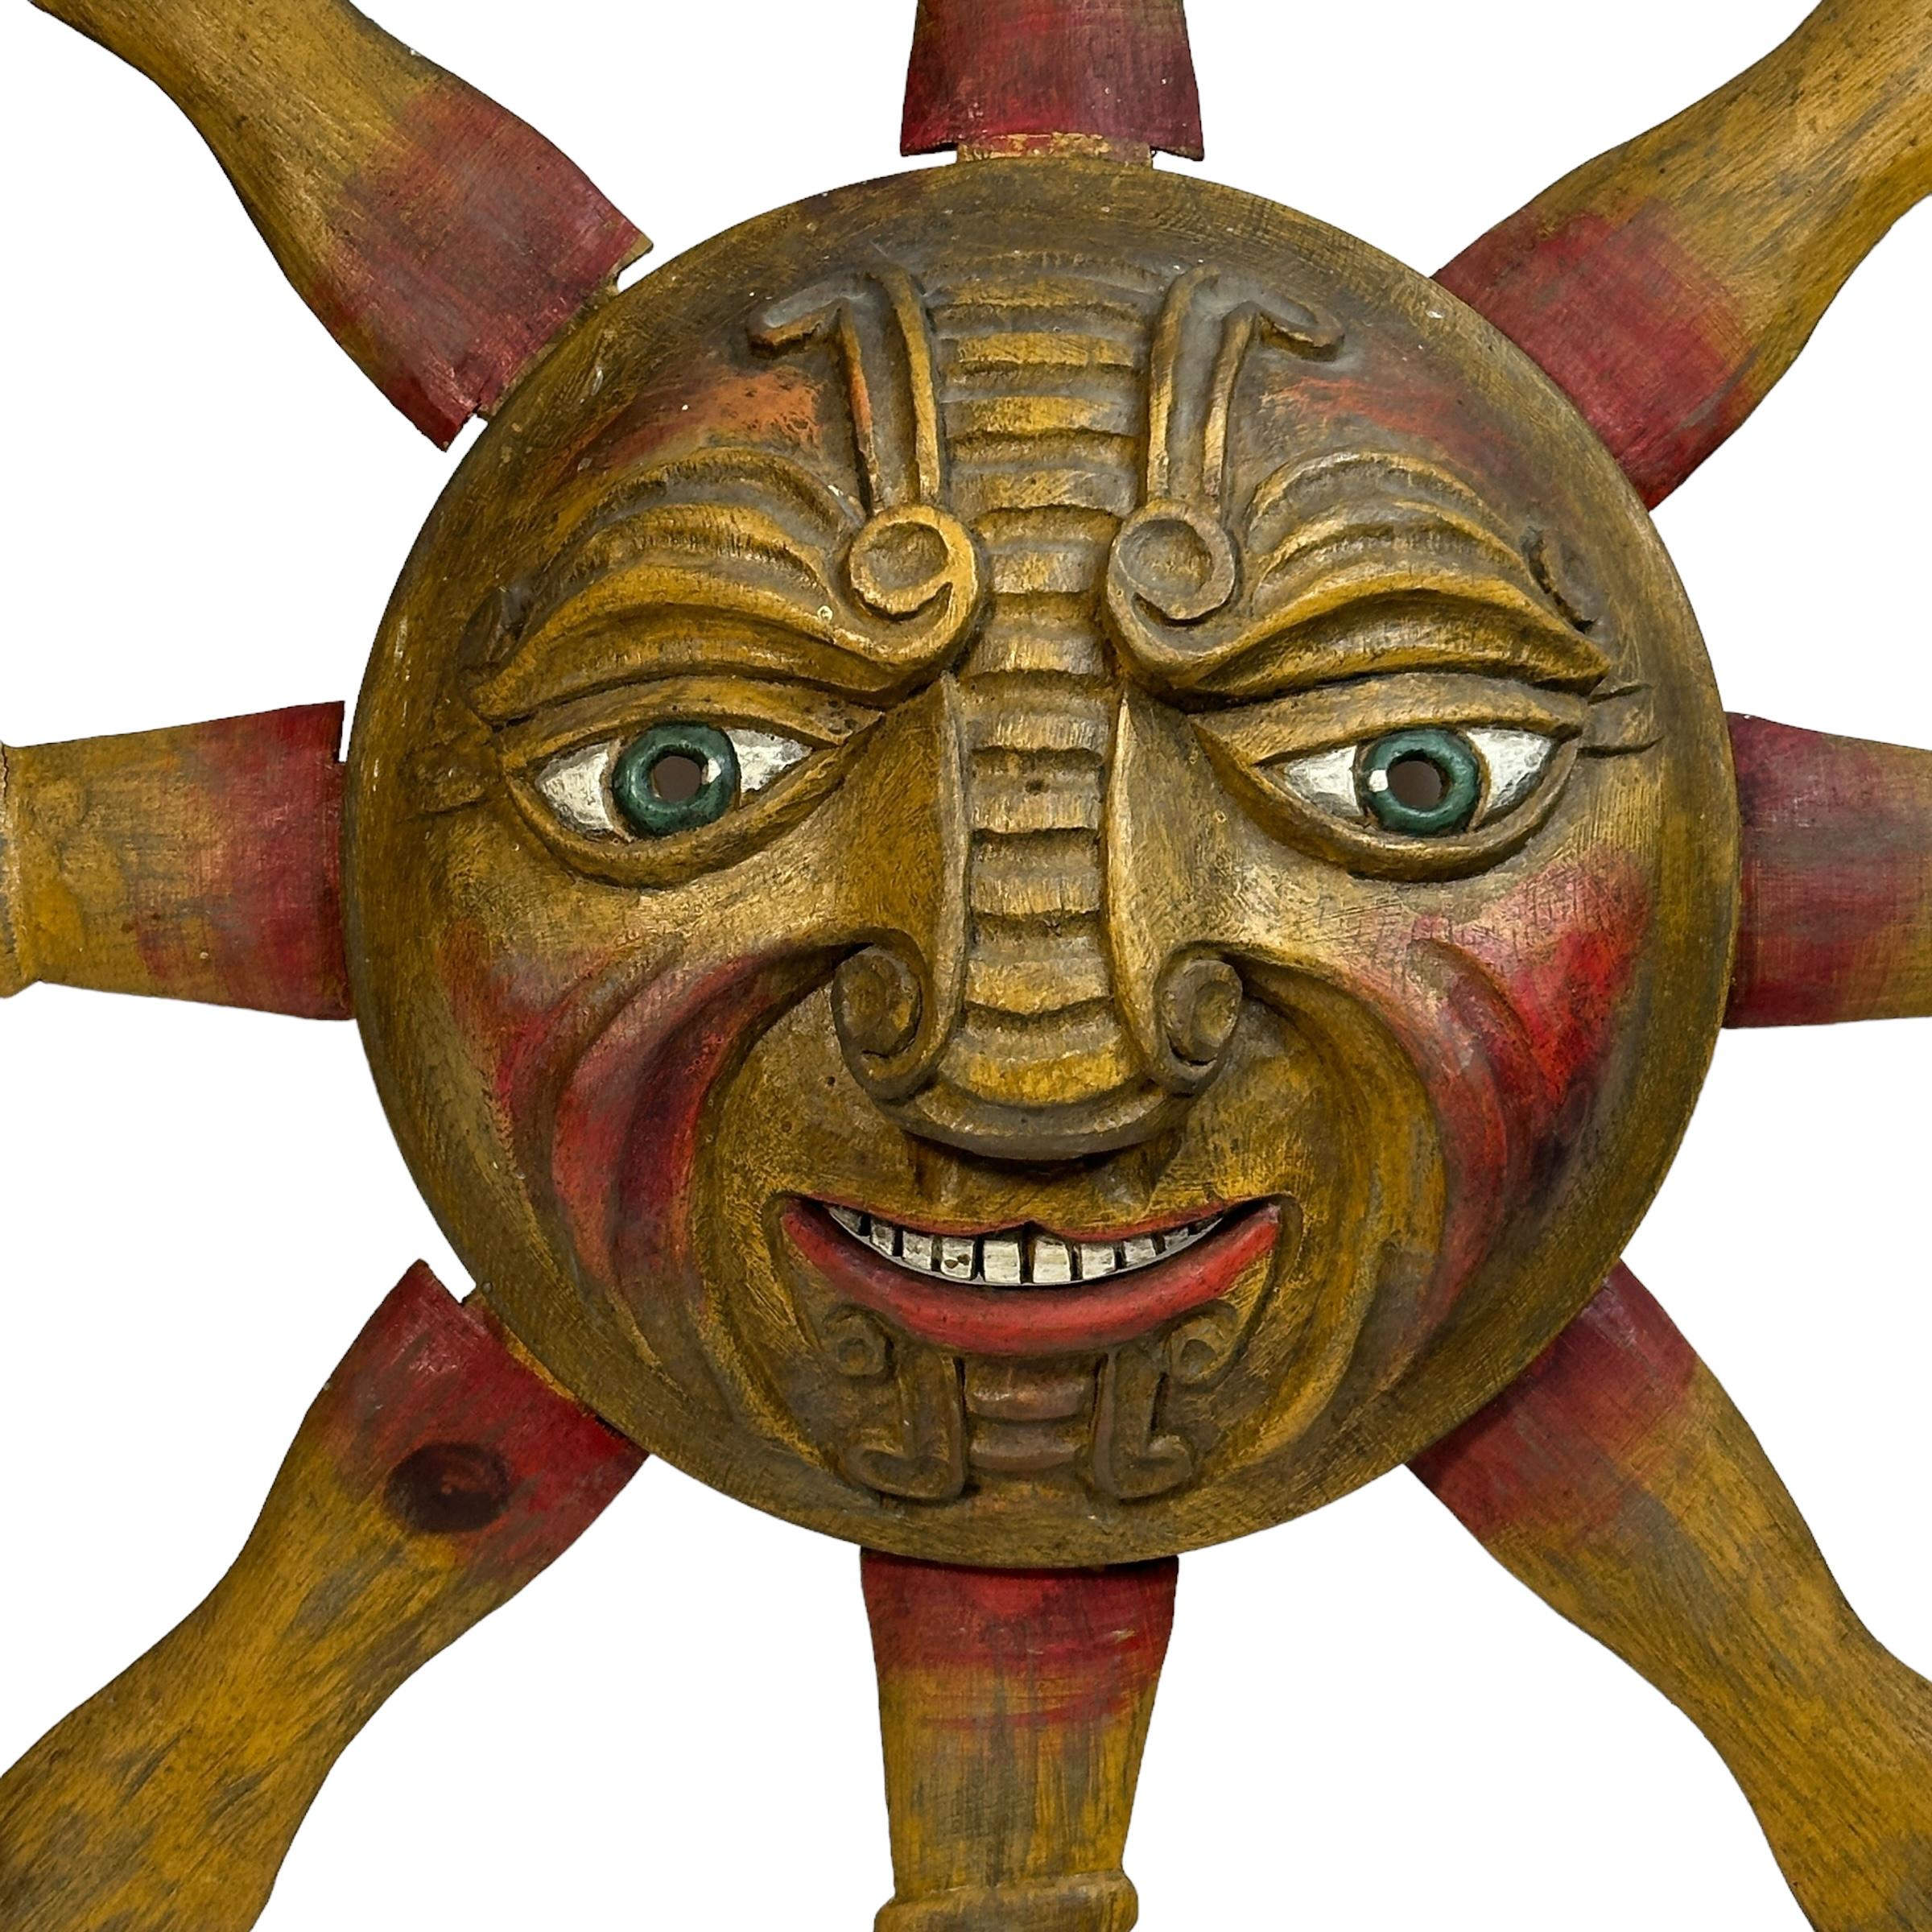 Beautiful wooden handcrafted Sun Face Wall Decoration Sculpture. Made in Germany by a wood worker in the 1930's or older. For safe and better shipping options the Sunbeams can be removed like seen in the picture. This is original made by the artist,